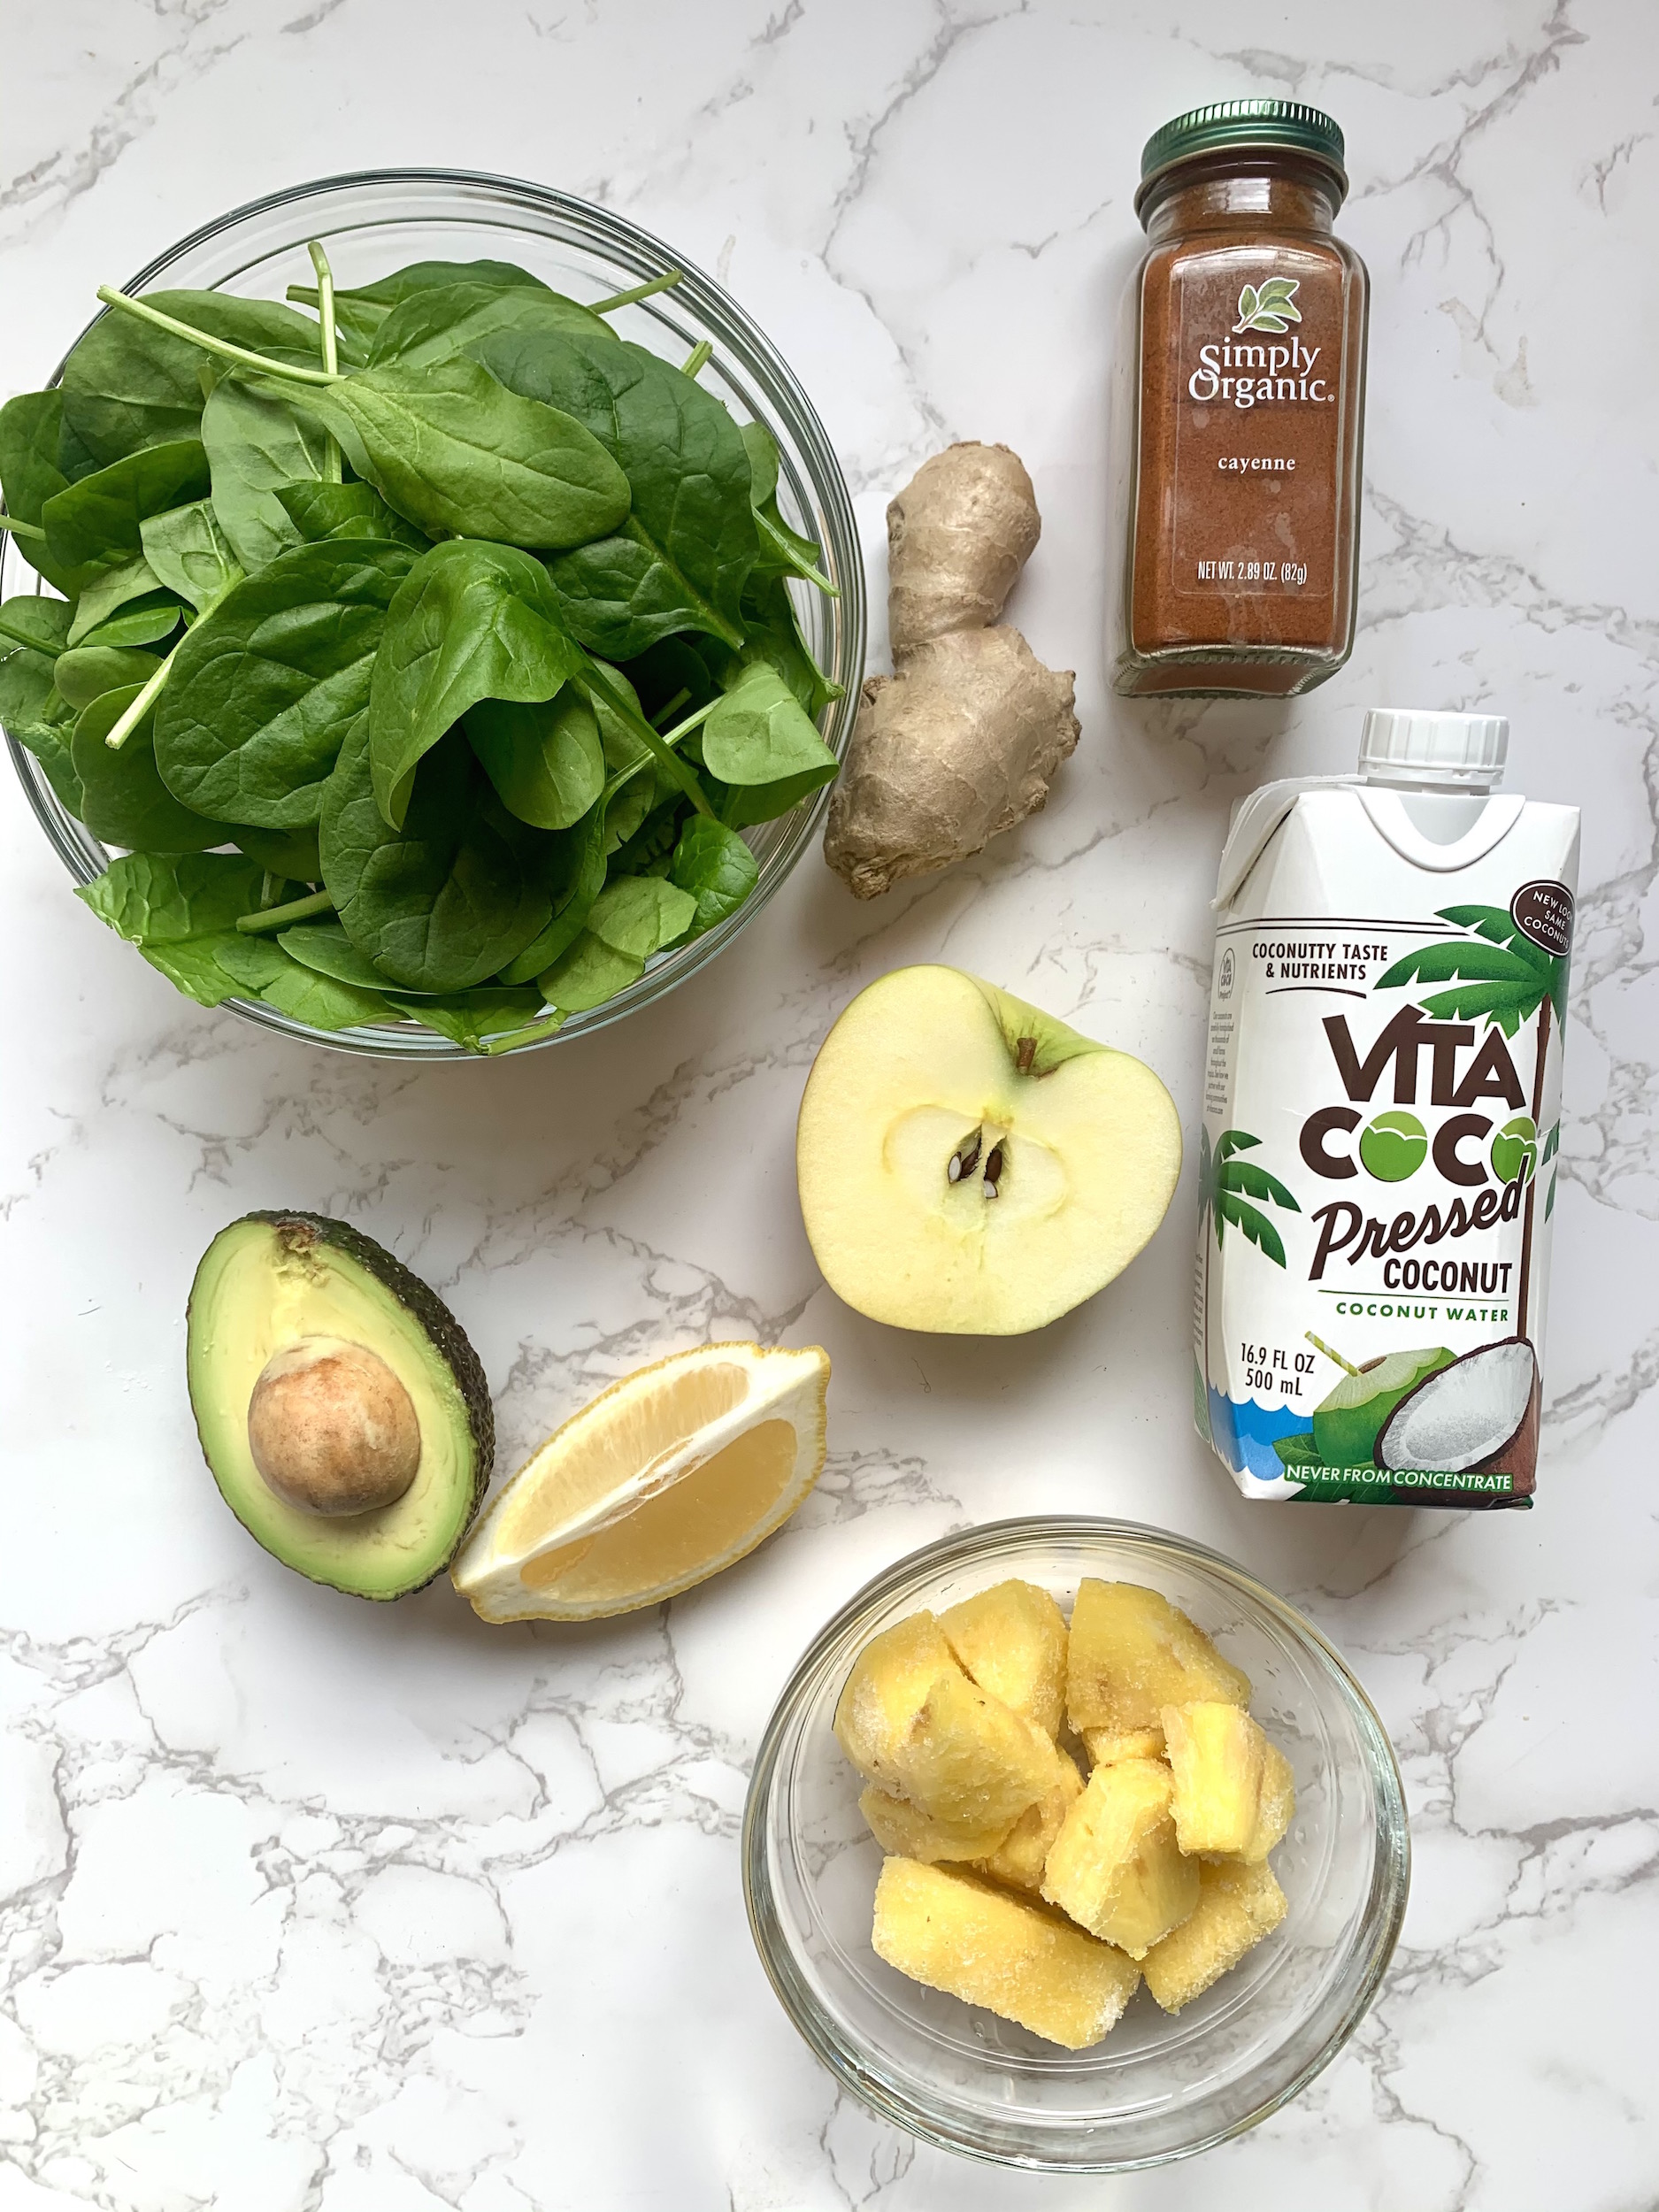 Ingredients laid out for green machine smoothie. Bowl of spinach leaves, half an avocado, half an apple, fresh ginger, bowl of pineapple chunks, carton of coconut water and bottle of cayenne pepper